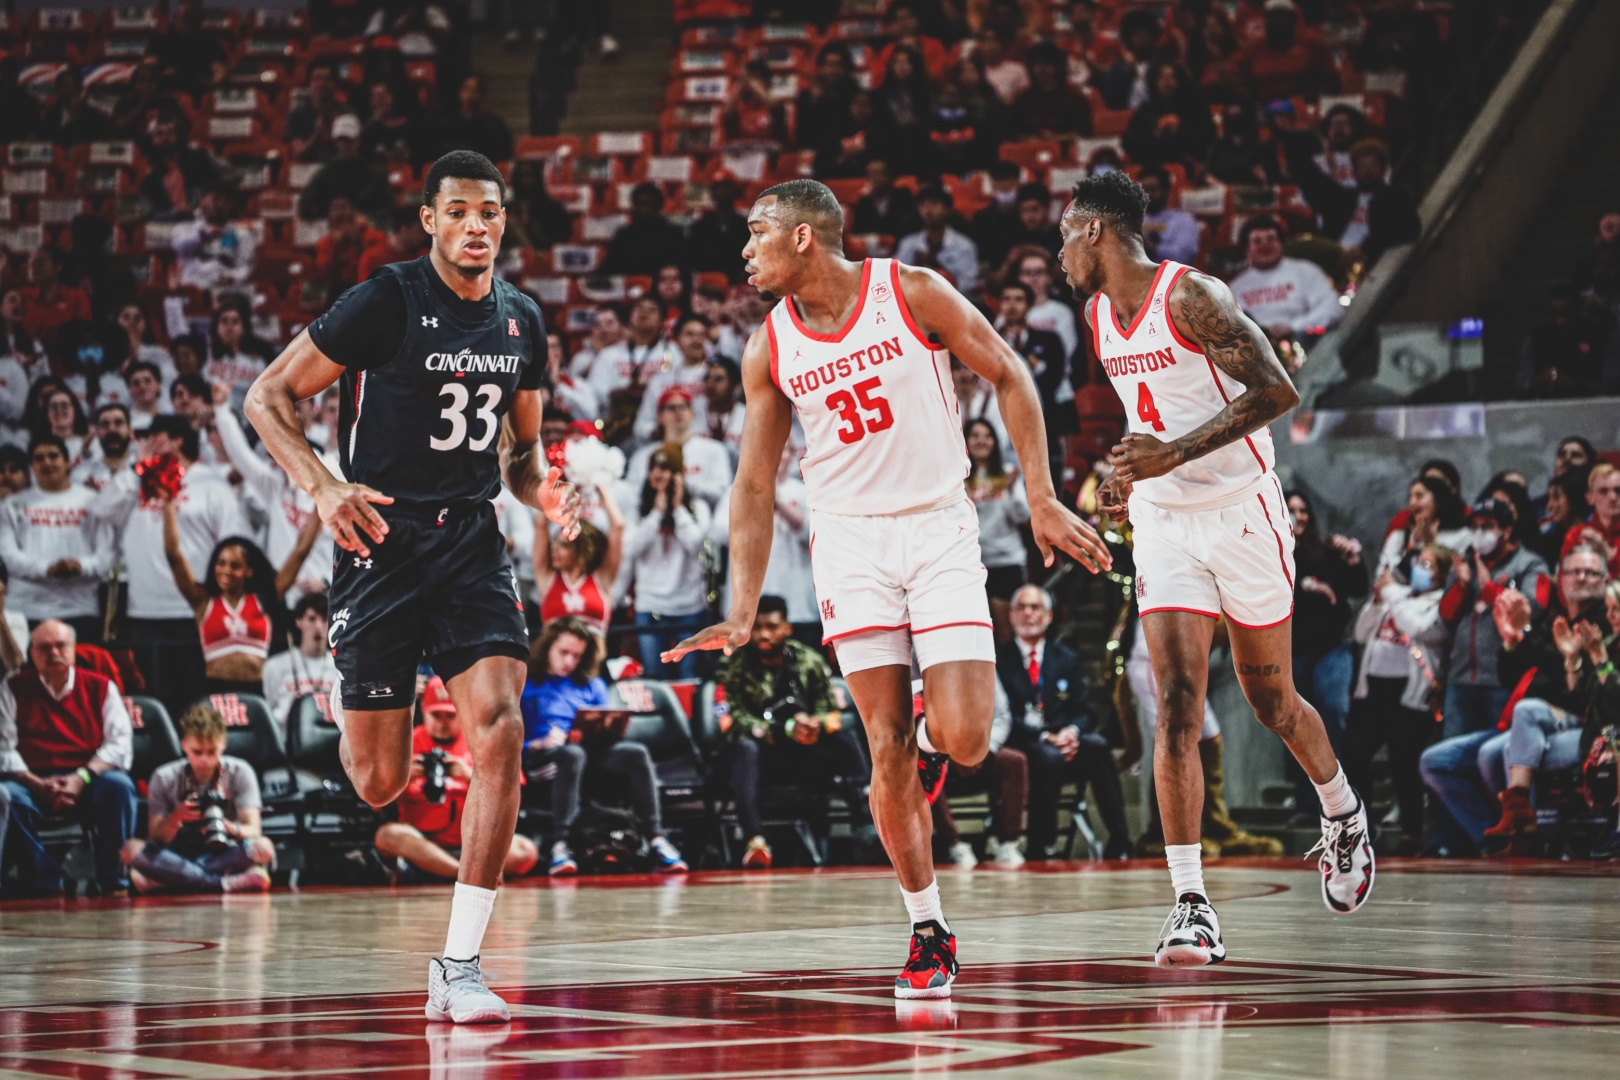 Fabian White Jr. carried the load offensively for the Cougars in their win over Cincinnati on Tuesday night at Fertitta Center. | Victor Carroll/The Cougar